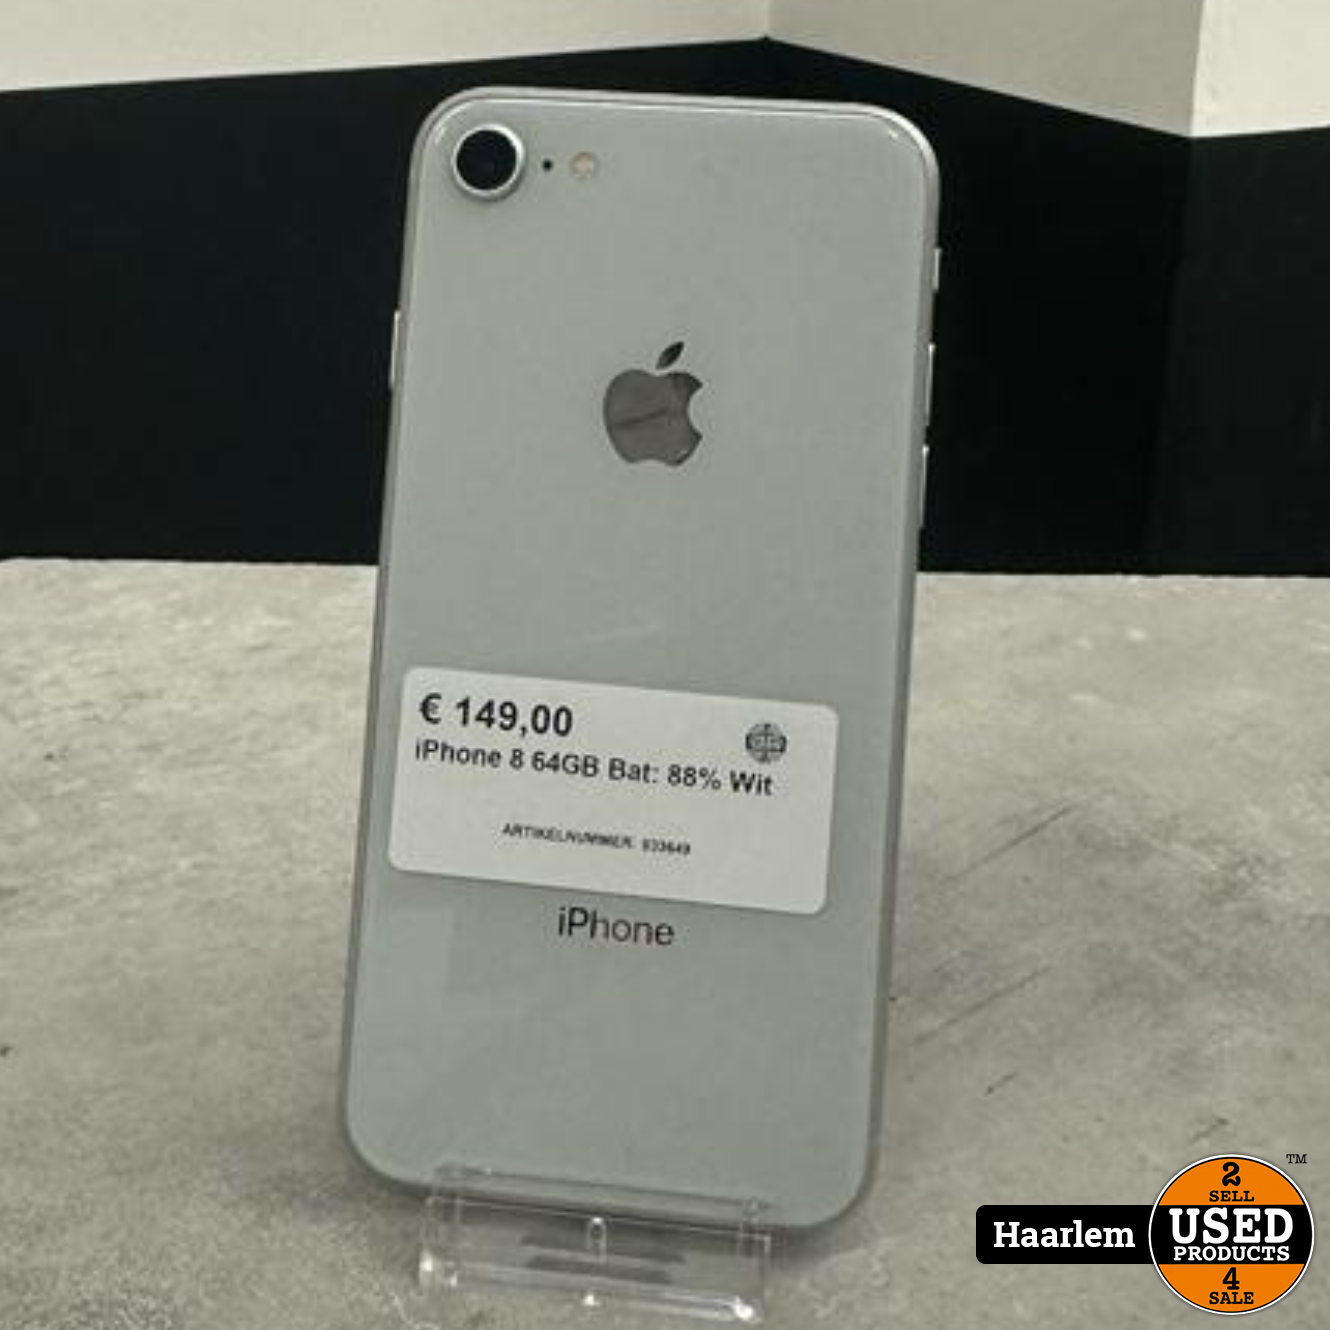 iPhone 8 64GB Silver - Used Products Haarlem Cronjéstraat